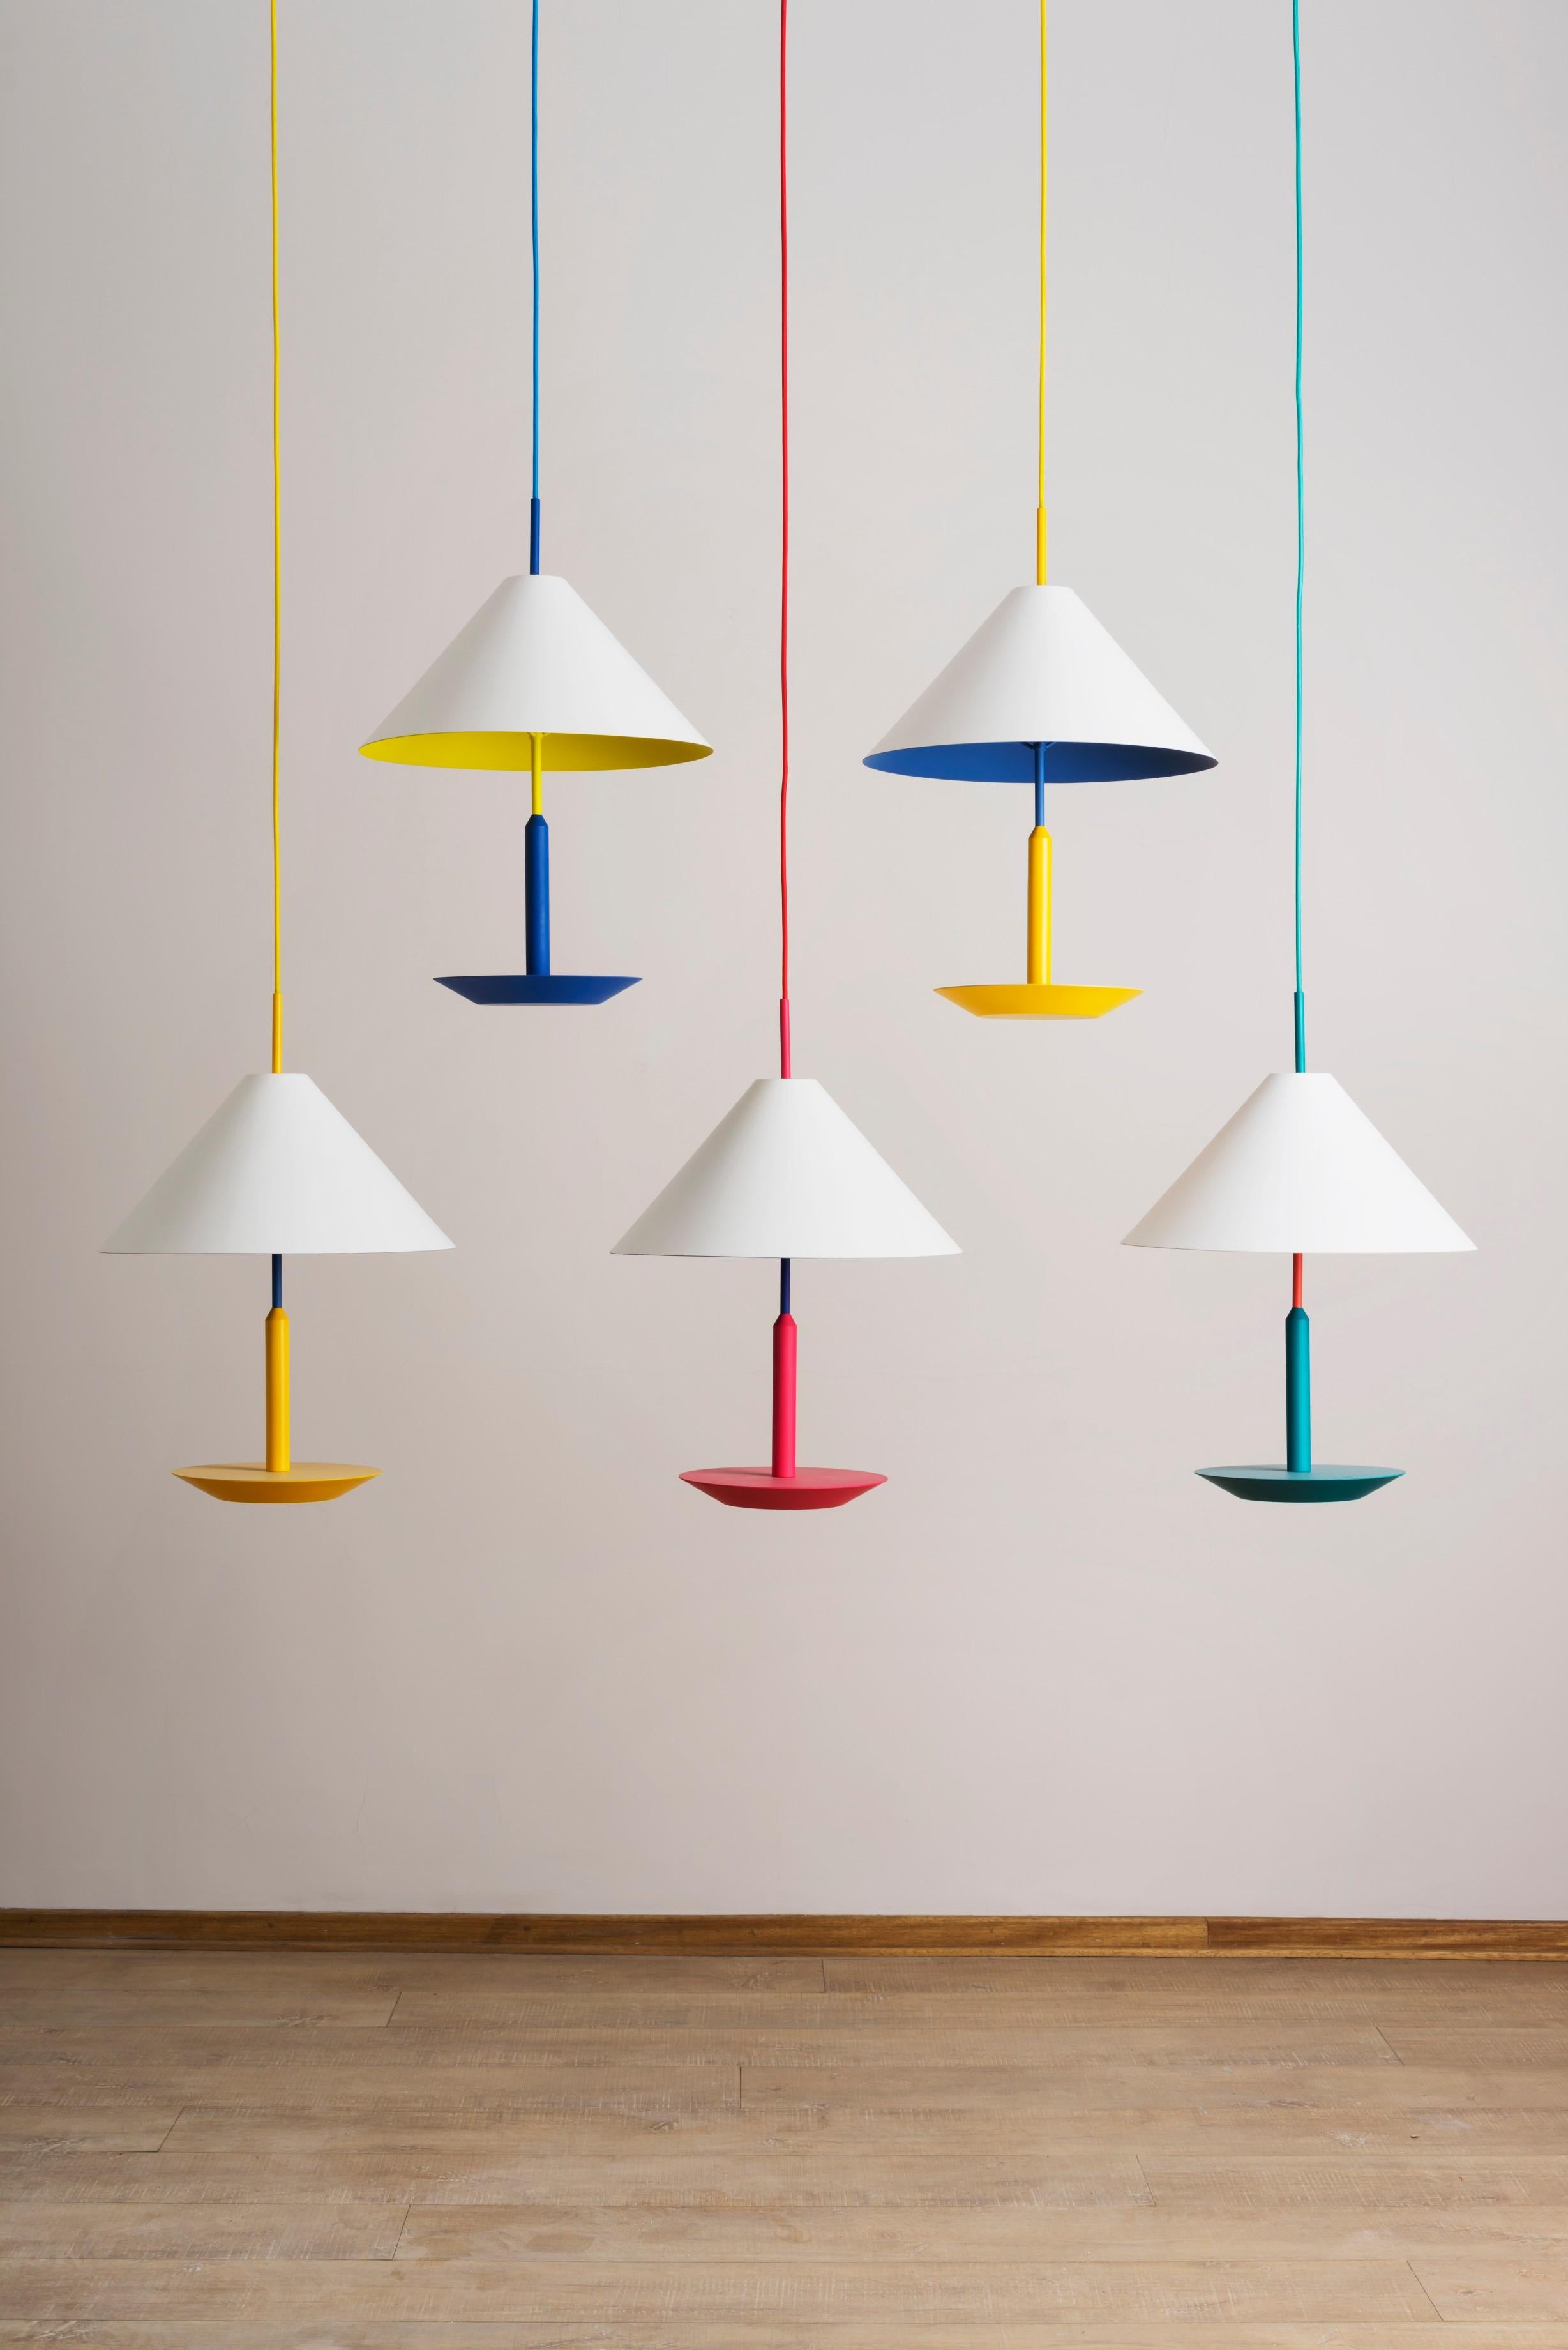 Colorful pendant lamp by Thomas Dariel, Maison Dada
Measures: Diameter 45 x height 65 cm
Tricoloured
Powder coated metal shade in matte white
Vibrant complementary tones on lampshade’s interior and base
Color cable, adjustable cable height (max